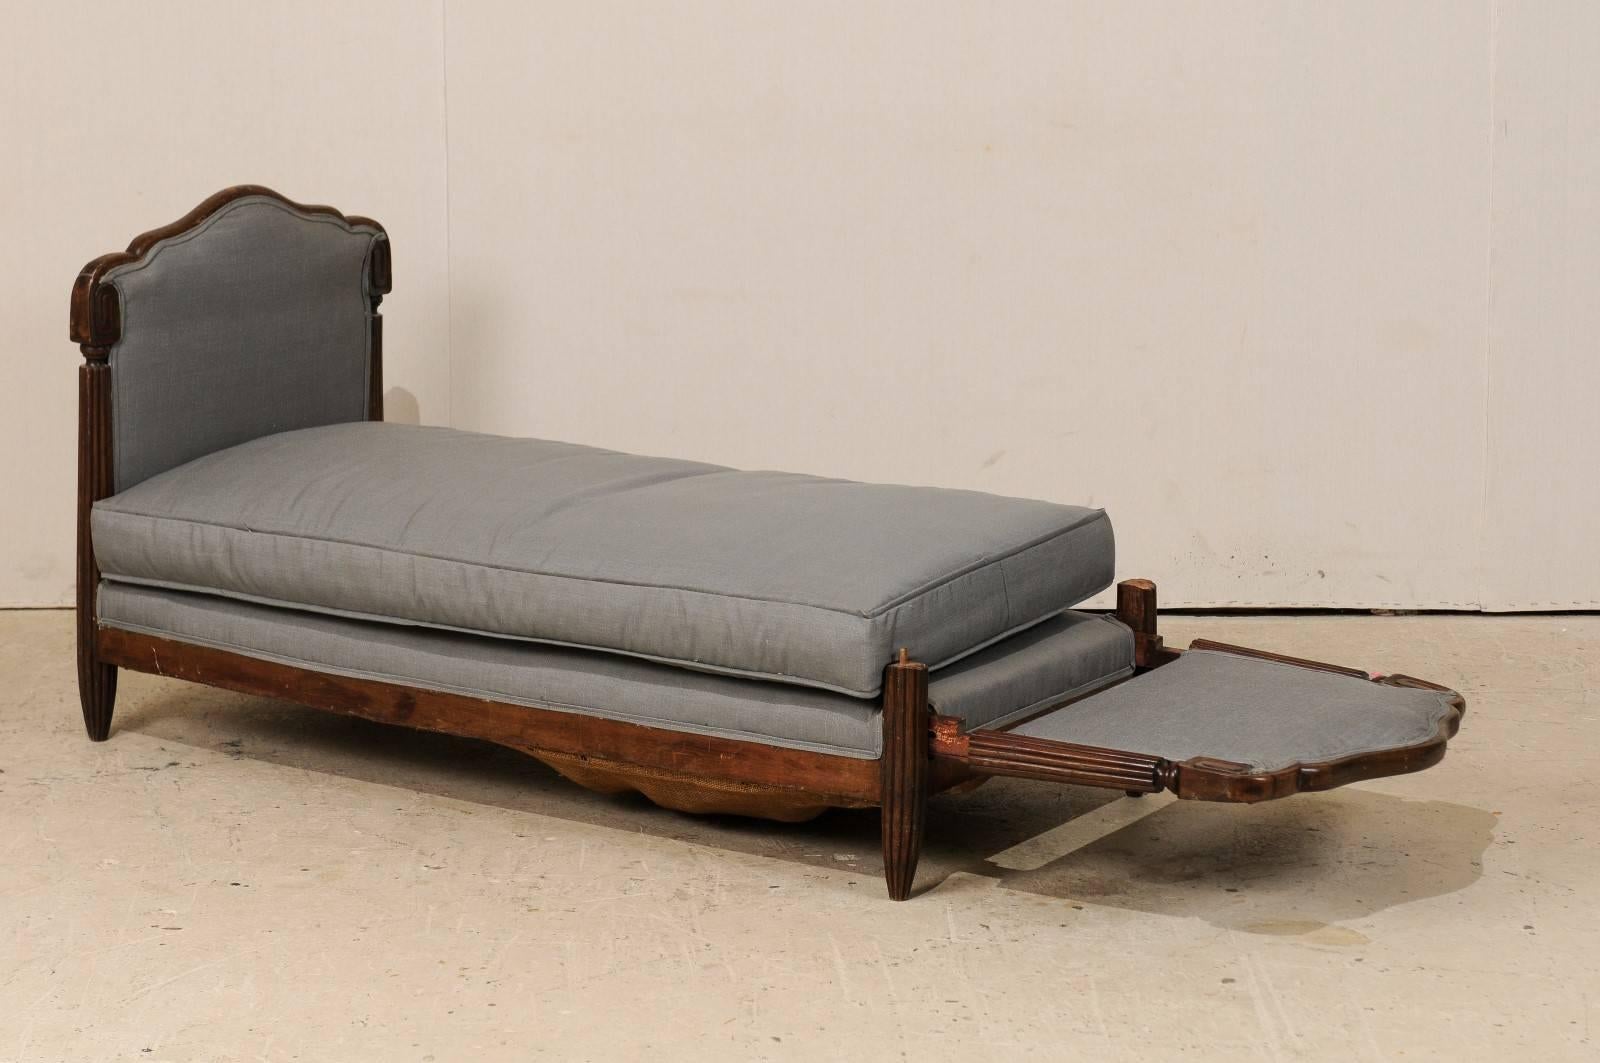 20th Century French Deco Lit De Jour (Daybed) with Drop Down Arm/Footboard, Early 20th C.